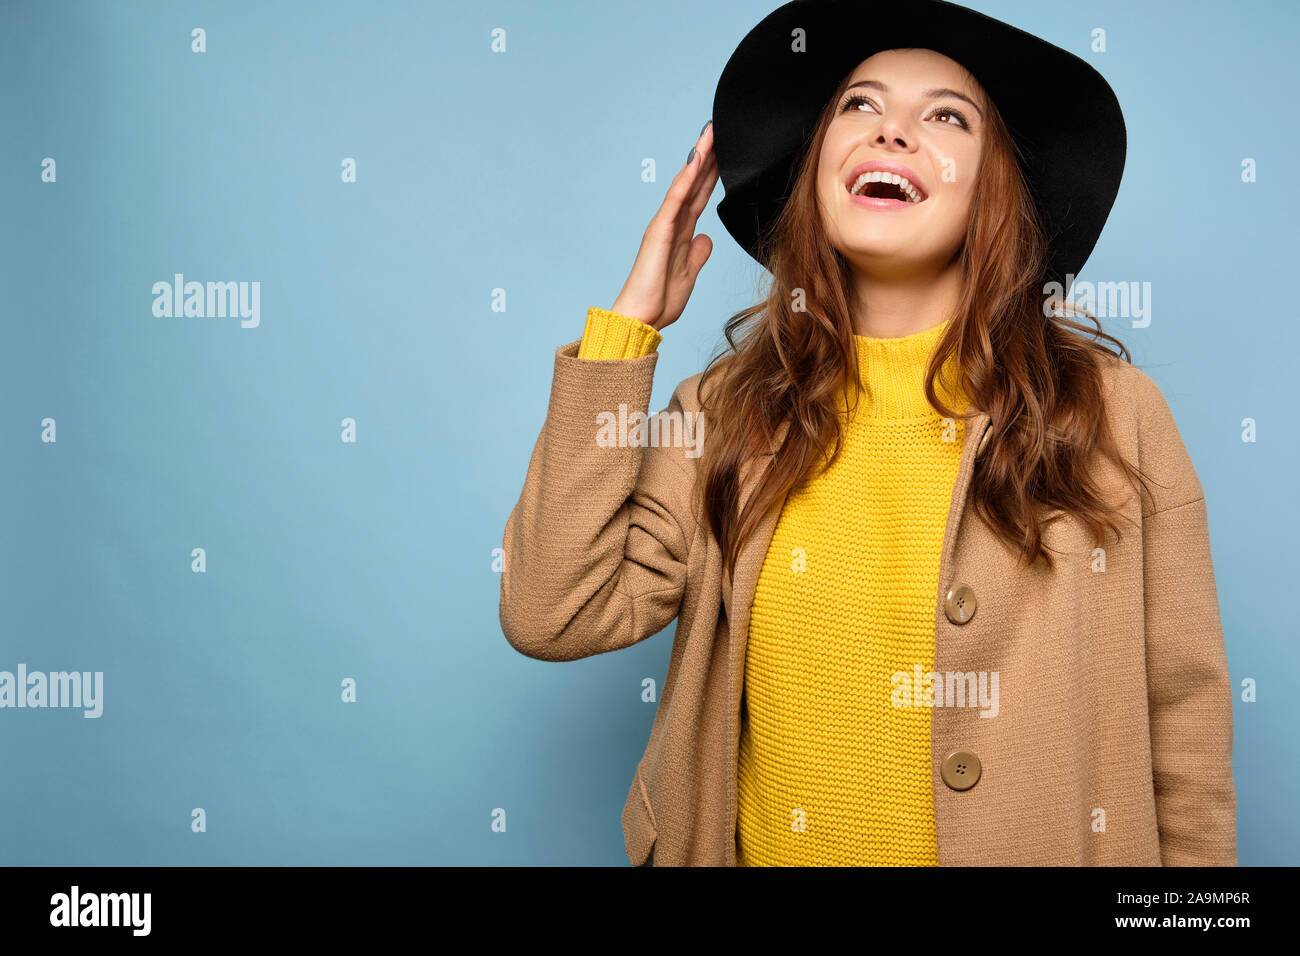 The brunette stands on a blue background in a yellow sweater, trench coat and black hat, joyfully looks at the top. Stock Photo